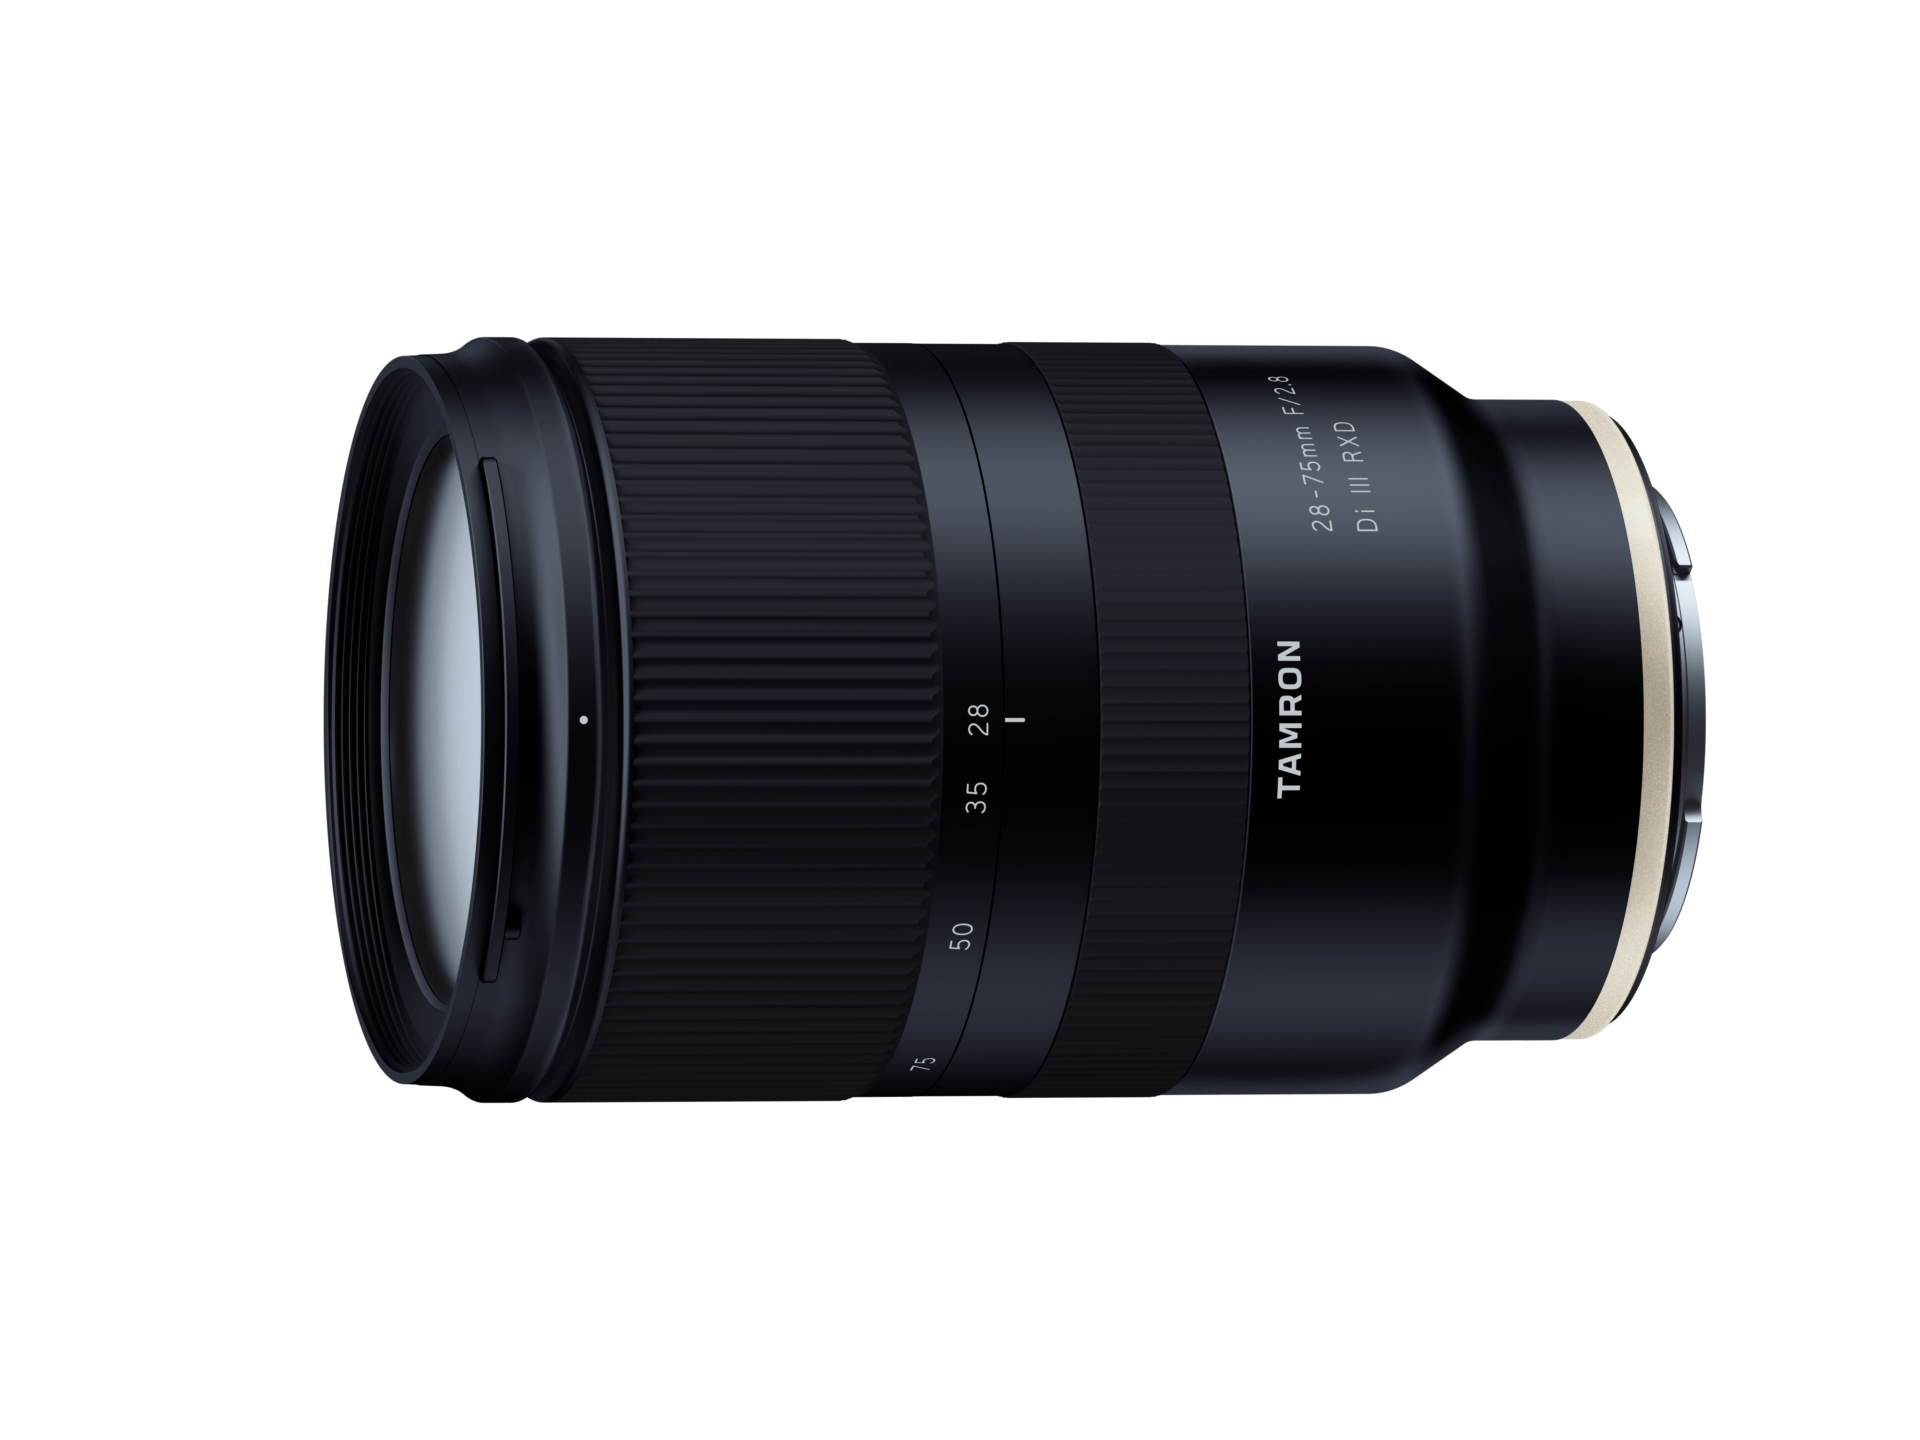 Tamron 28-75mm F2.8 Di III RXD (A036) for Sony E-mount